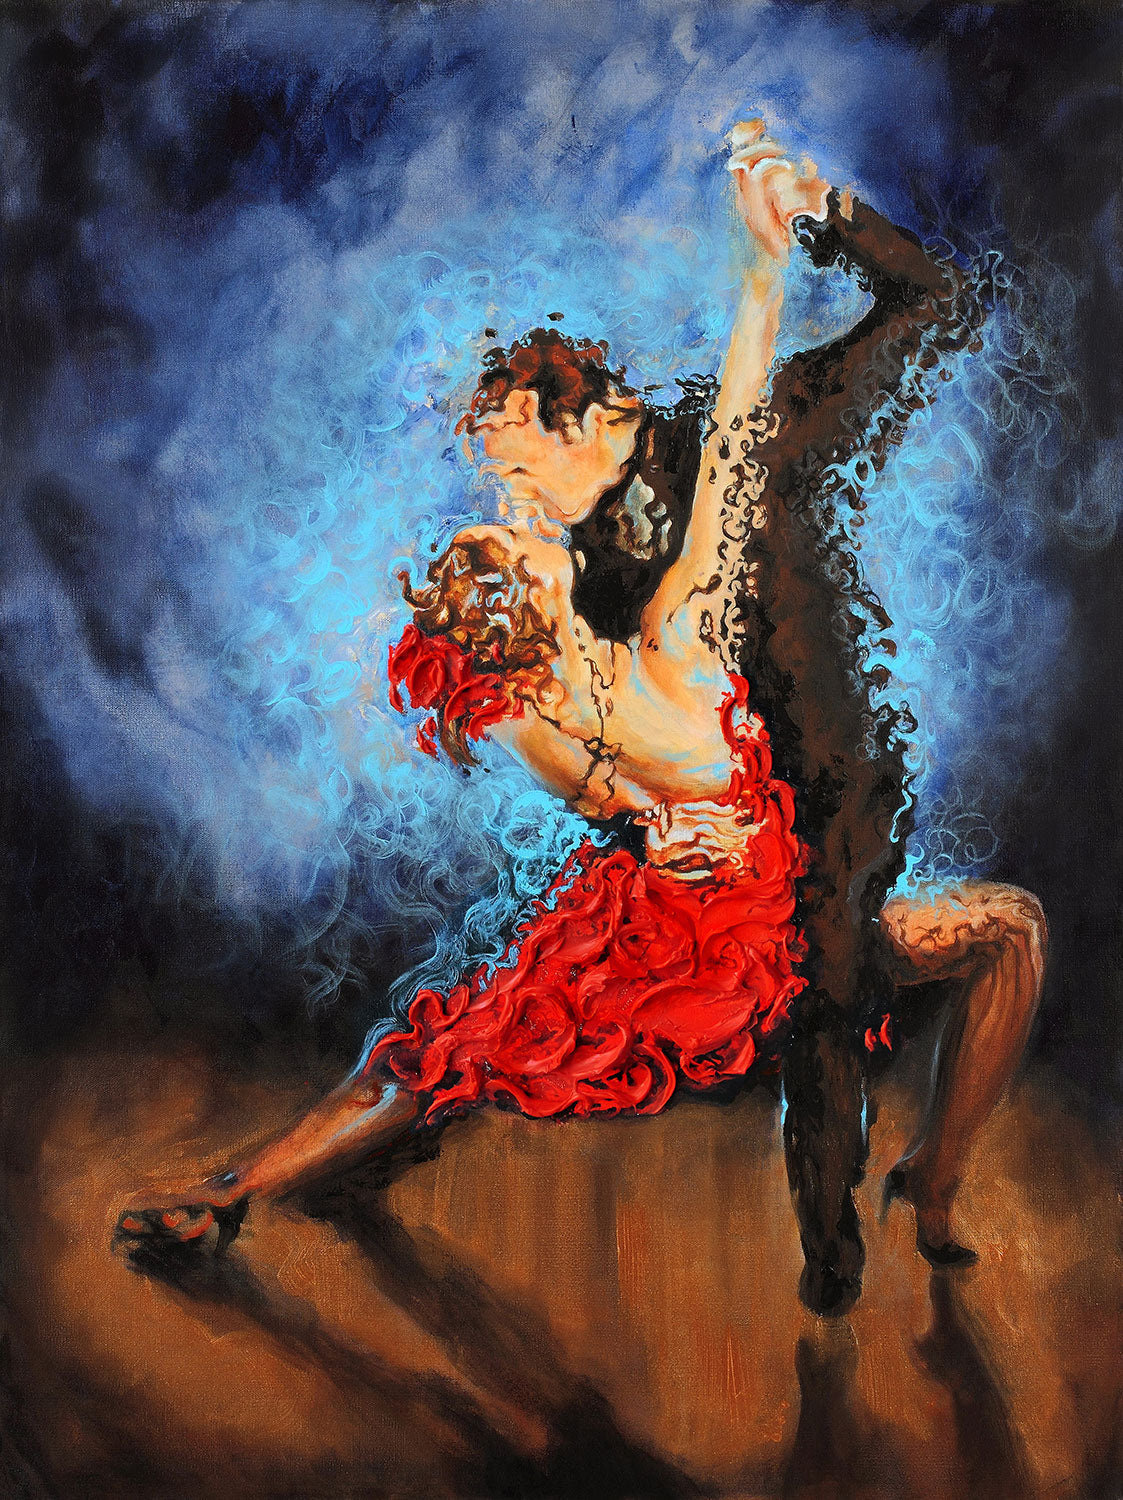 "Melting" Flamenco couple dancers with red dress painting embellished